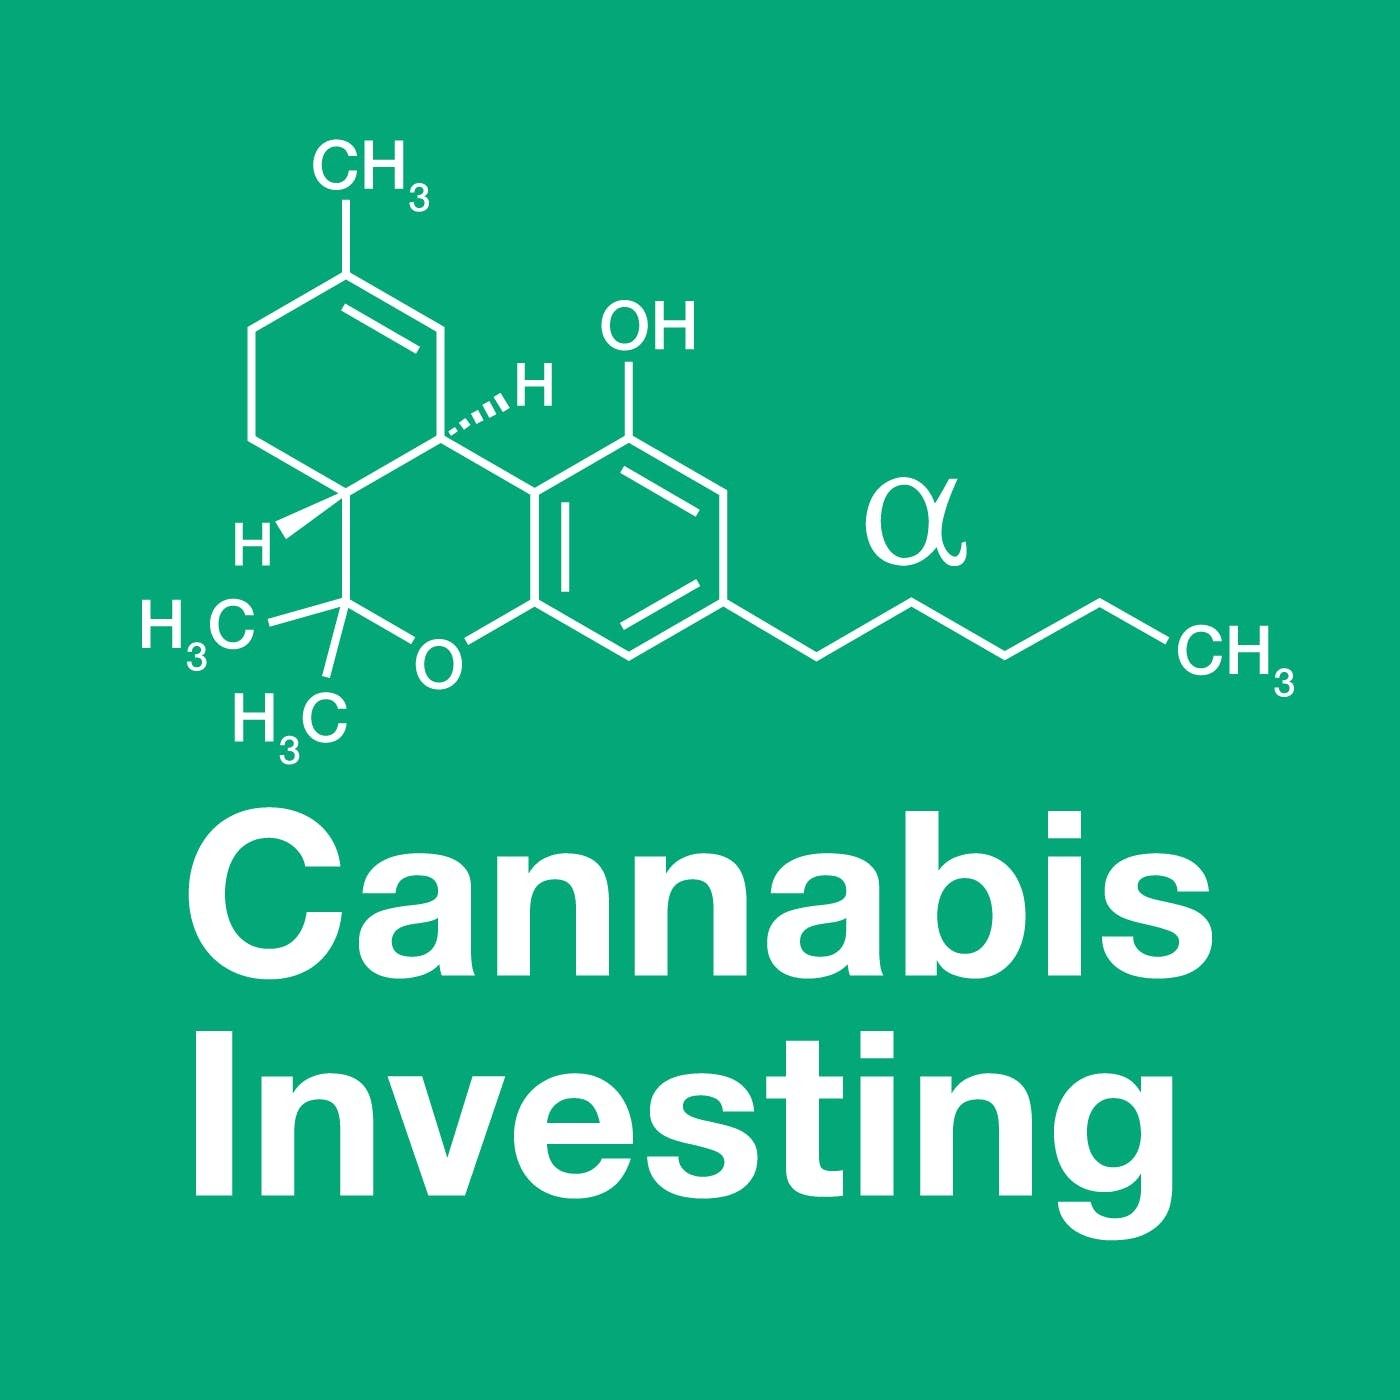 All Cannabis Investors Need Is Just A Little Patience